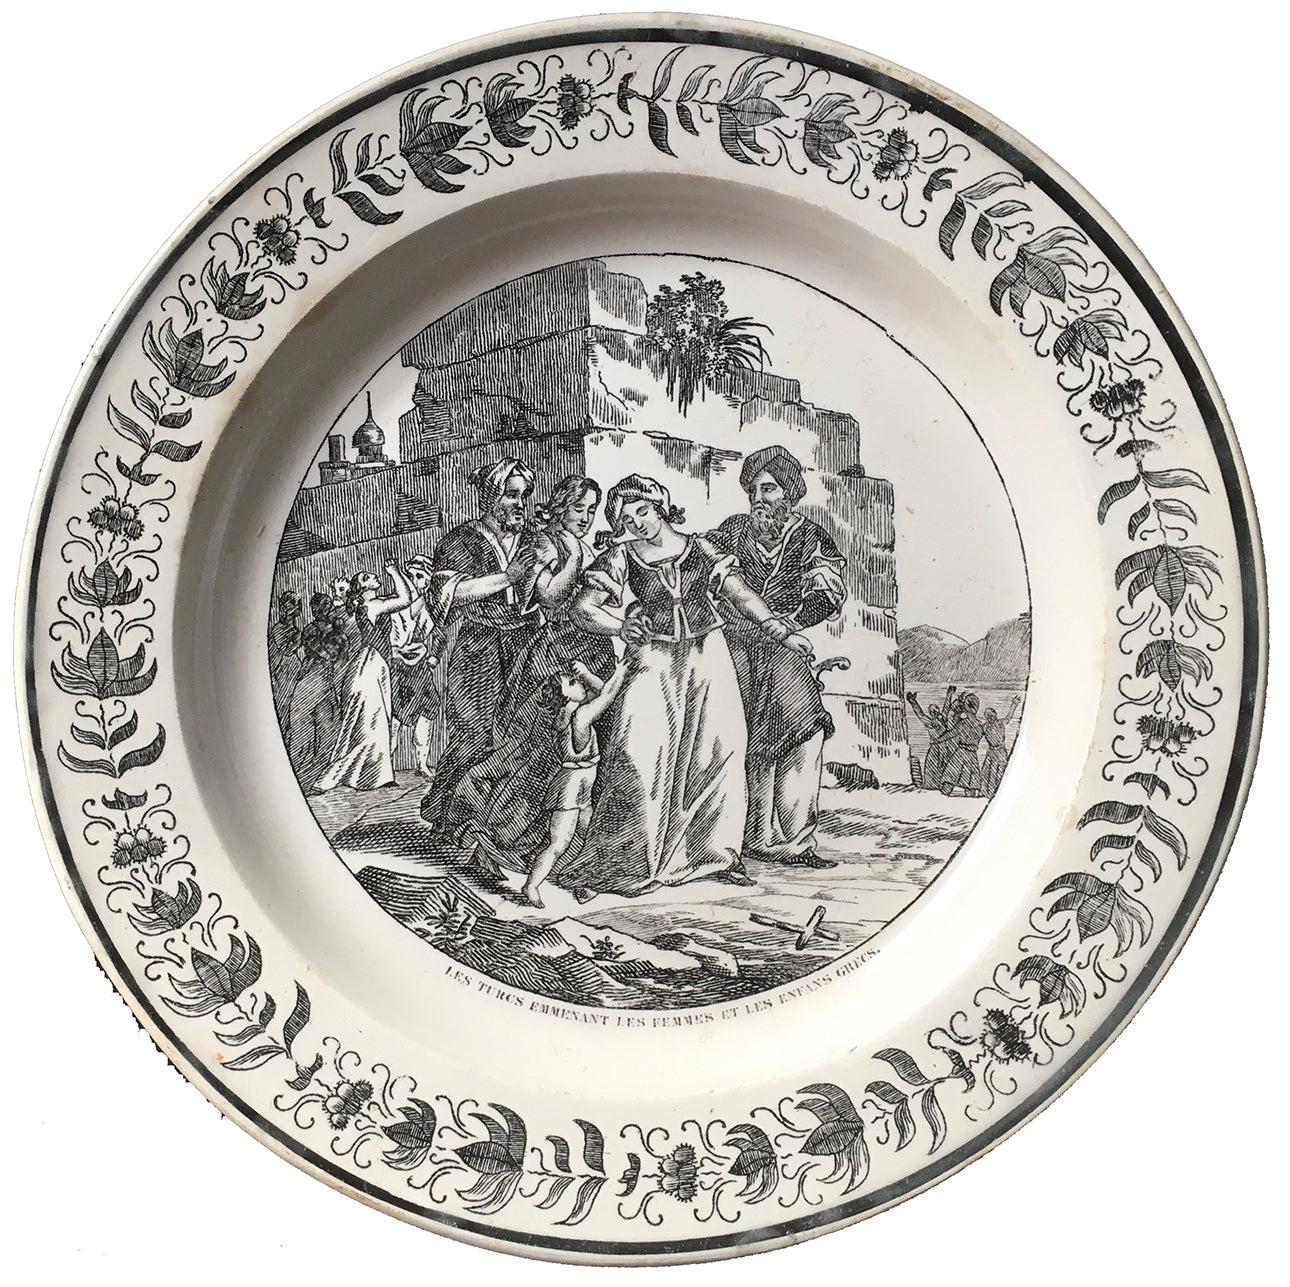 SOLD French Creil Creamware Plate, Transfer-Printed with Turks Freeing Greek Women and Children